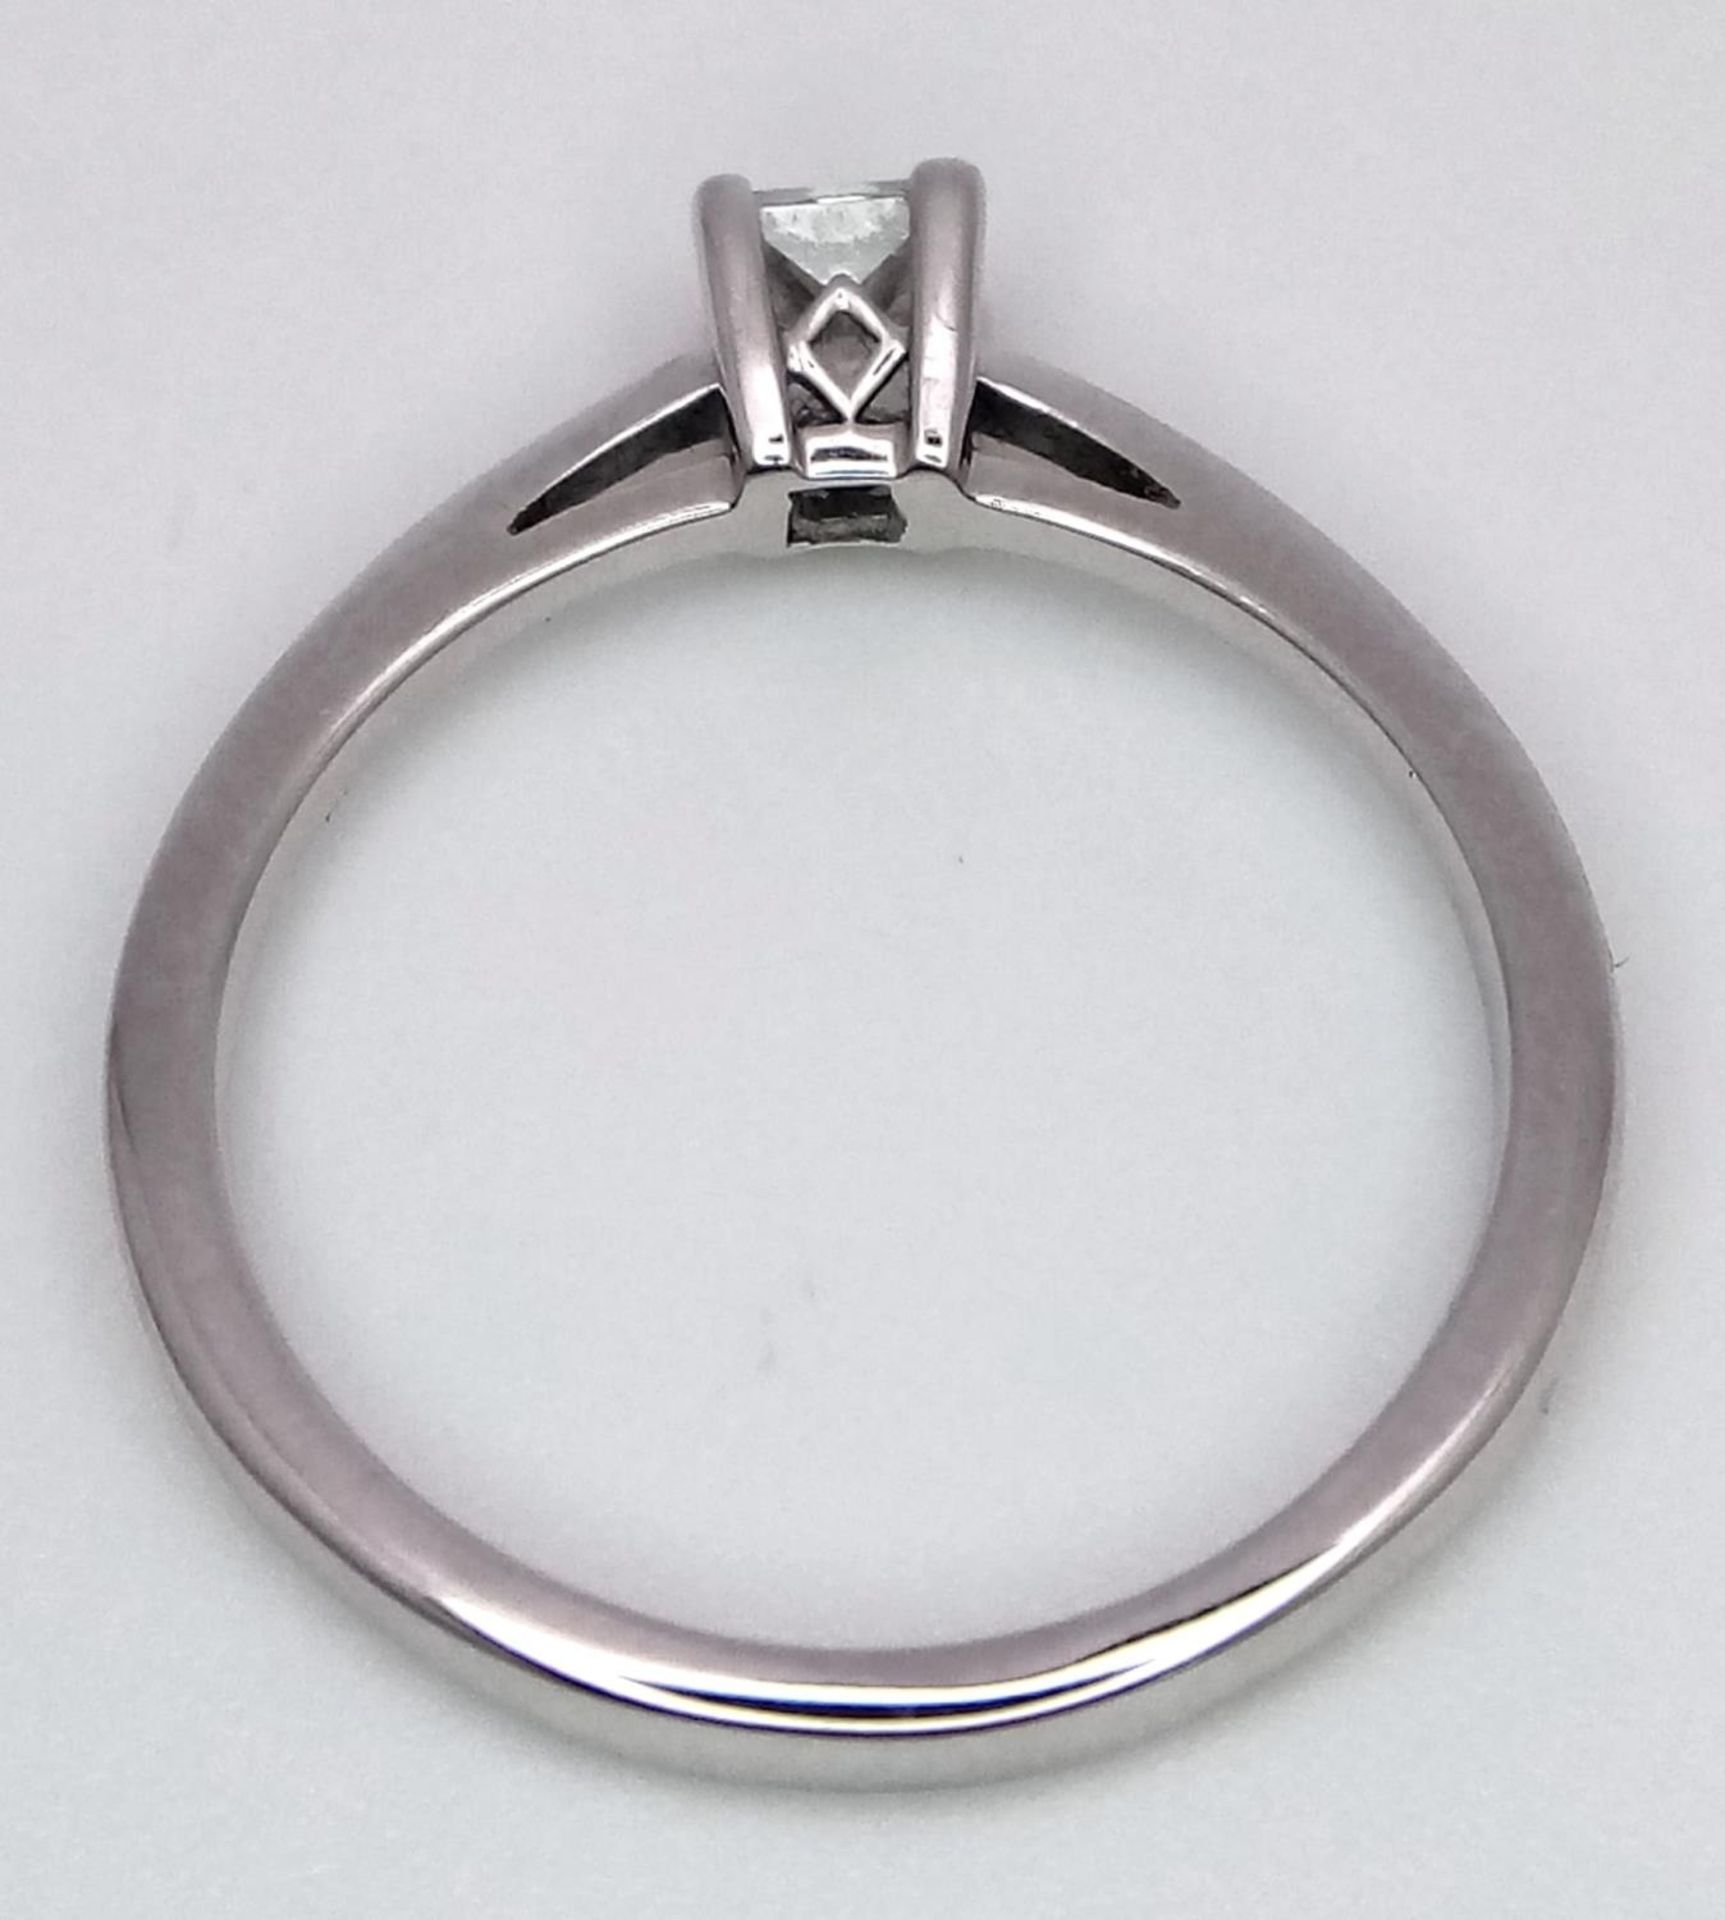 AN 18K WHITE GOLD PRINCESS CUT DIAMOND SOLITAIRE RING - 0.40CT APPROX. 3.1G. SIZE P - Image 3 of 4